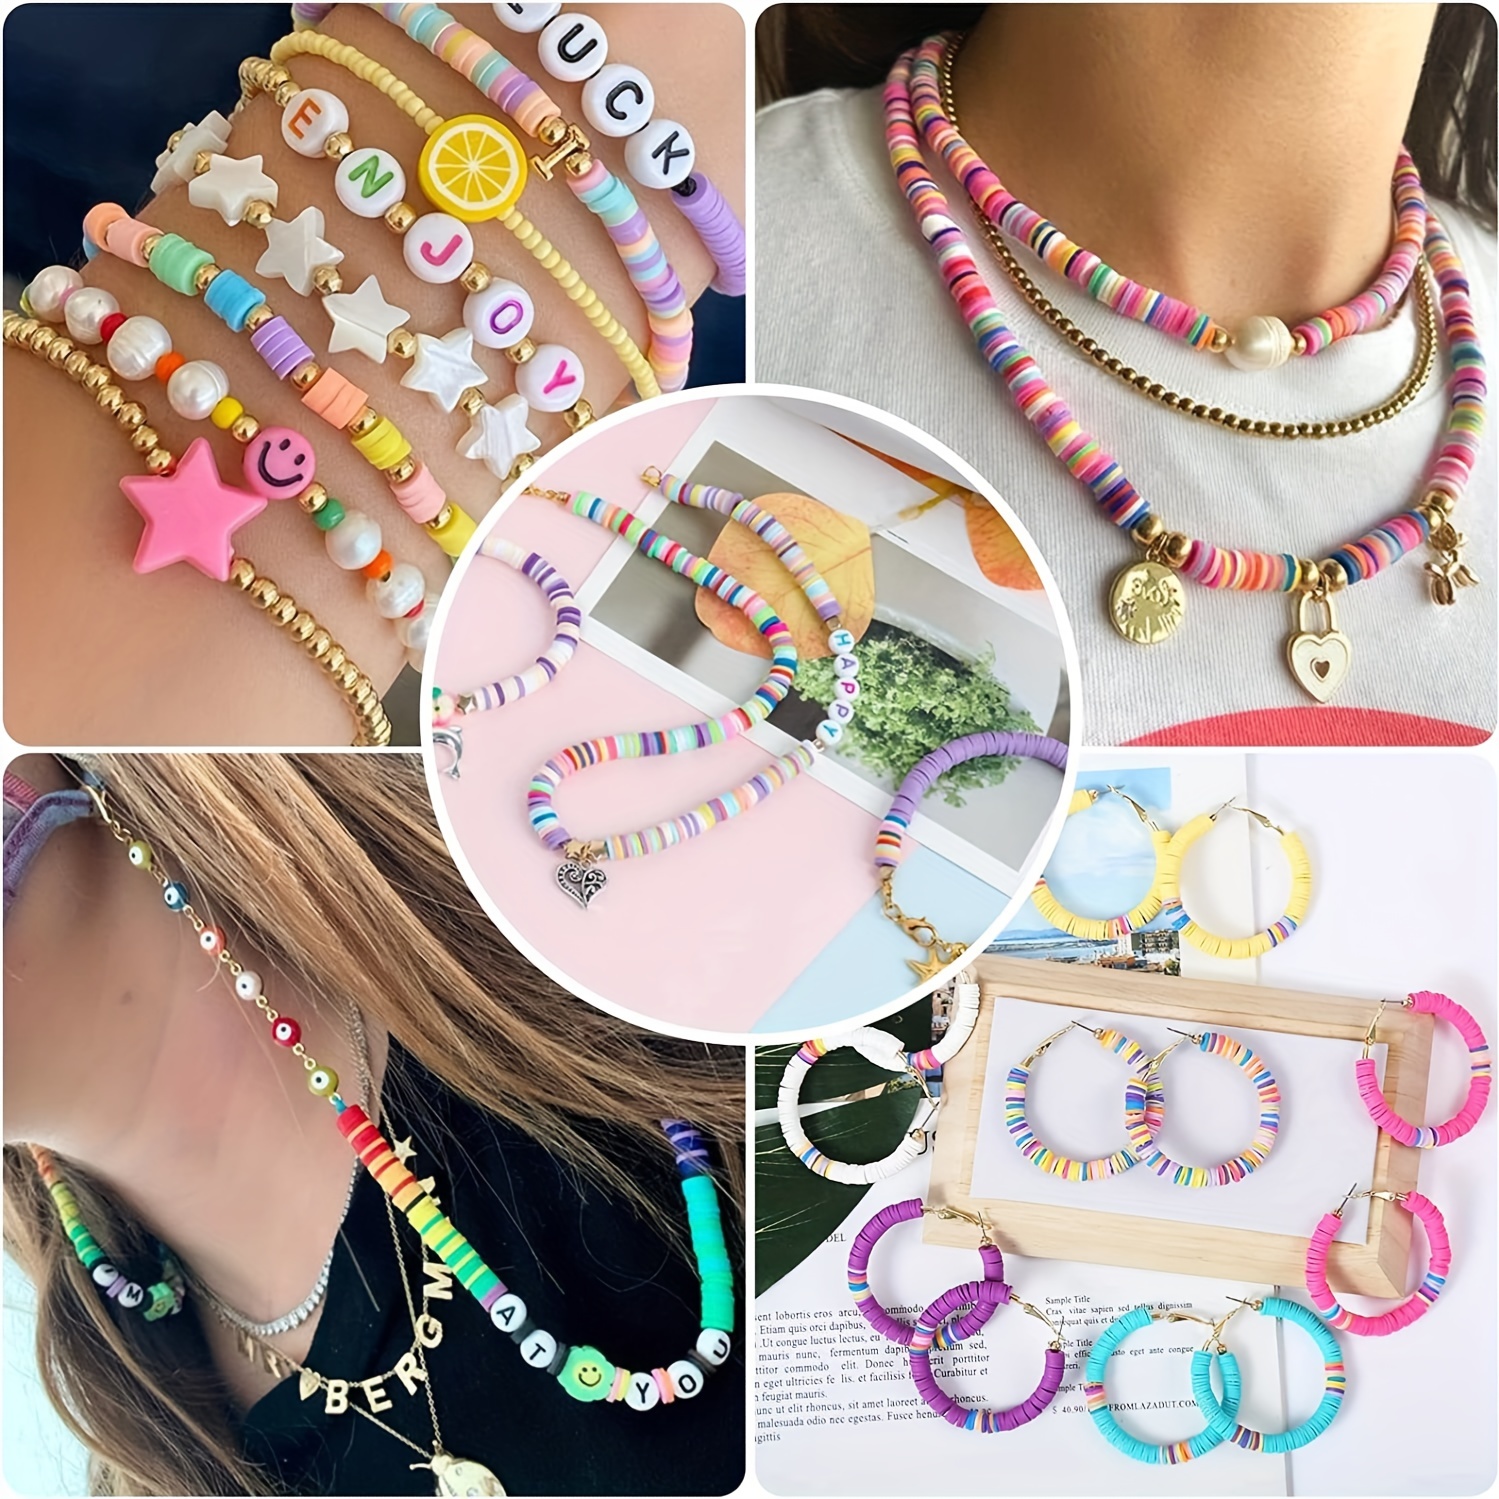 2500pcs Bracelet Making Kit for Girls for 10-12, Clay Beads for Friendship  Bracelet Making Kit, Charms Heishi Beads for Jewelry 5 